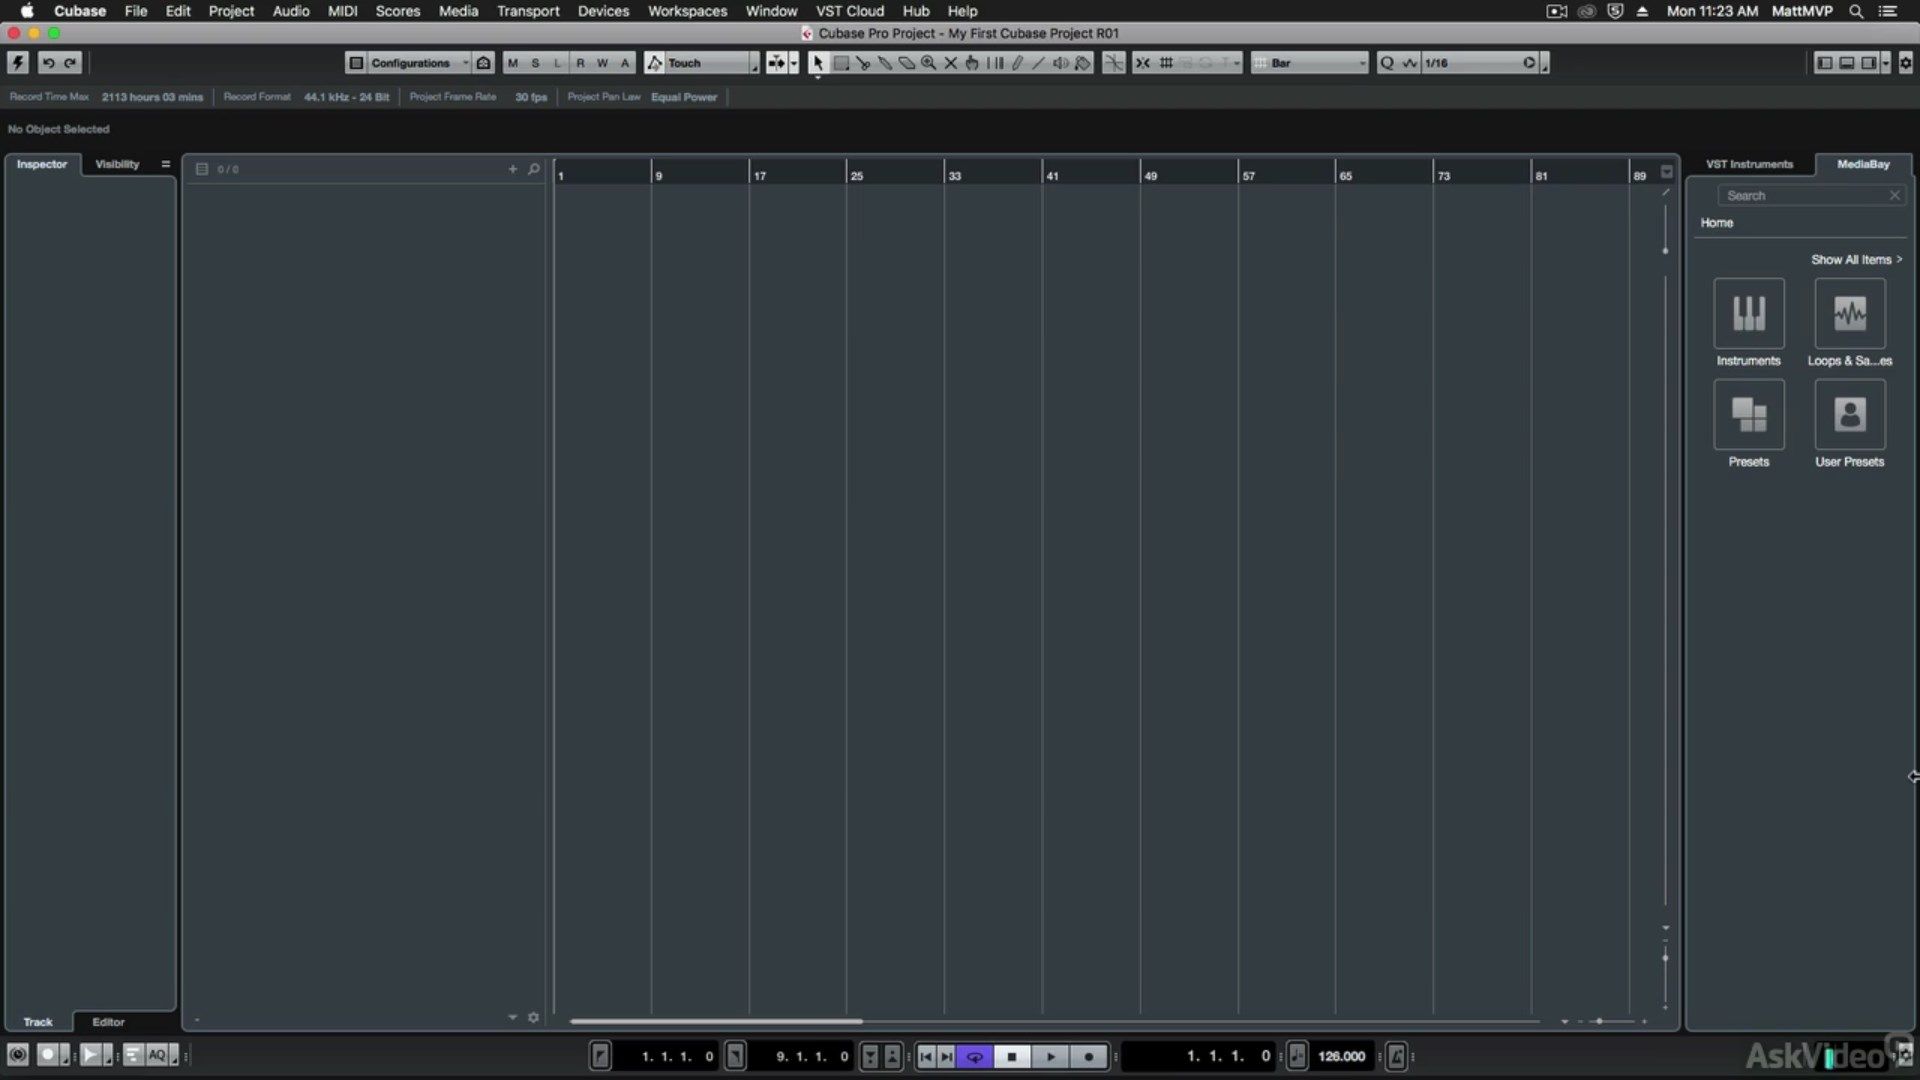 Beginner Guide to Cubase 9 By Ask.Video